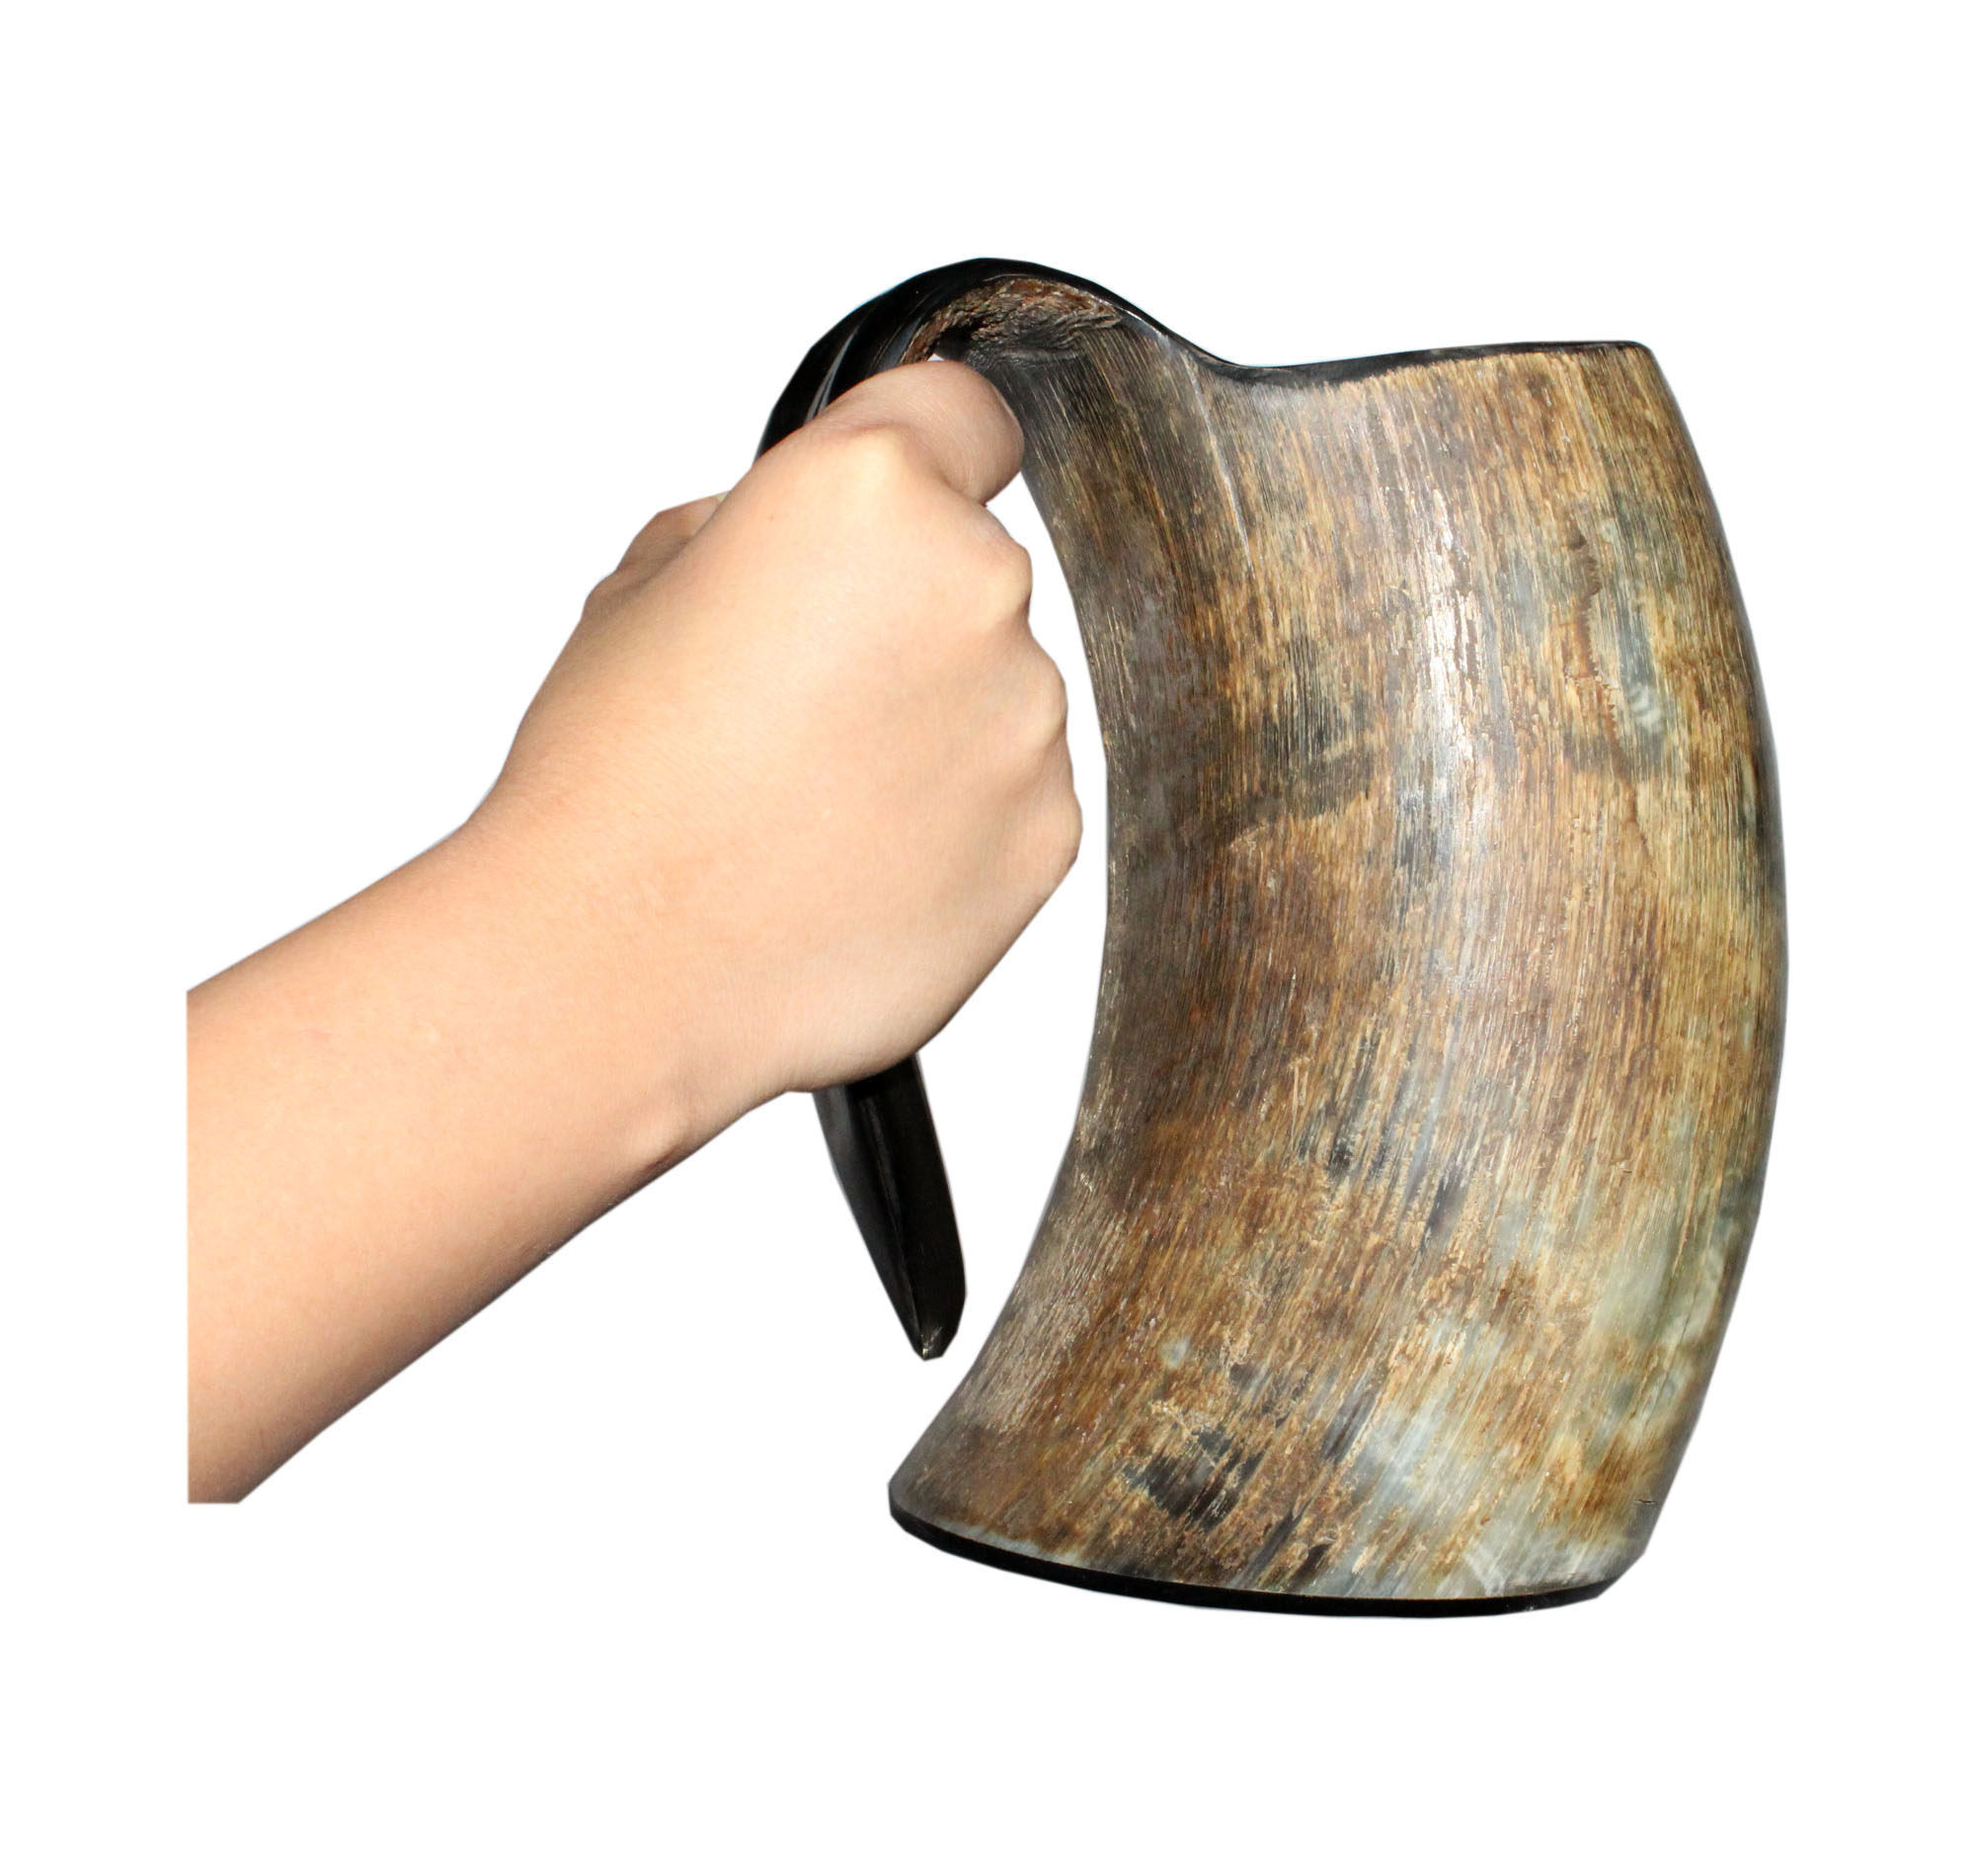 Details about   Viking Drinking Horn With Stand Authentic Norse Drinking Beer & Water Mug 